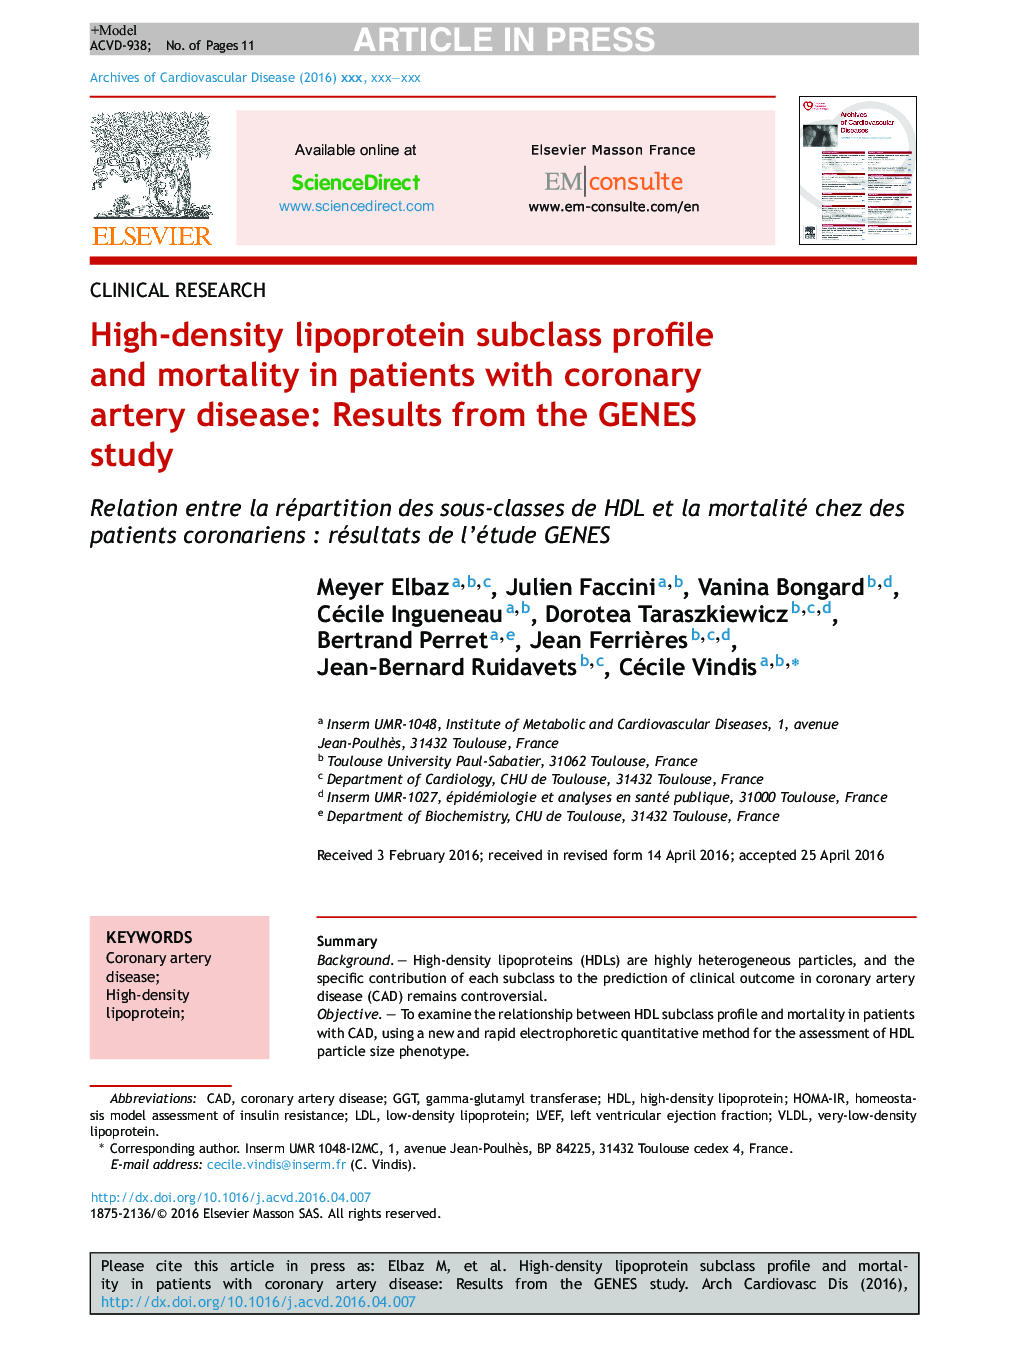 High-density lipoprotein subclass profile and mortality in patients with coronary artery disease: Results from the GENES study